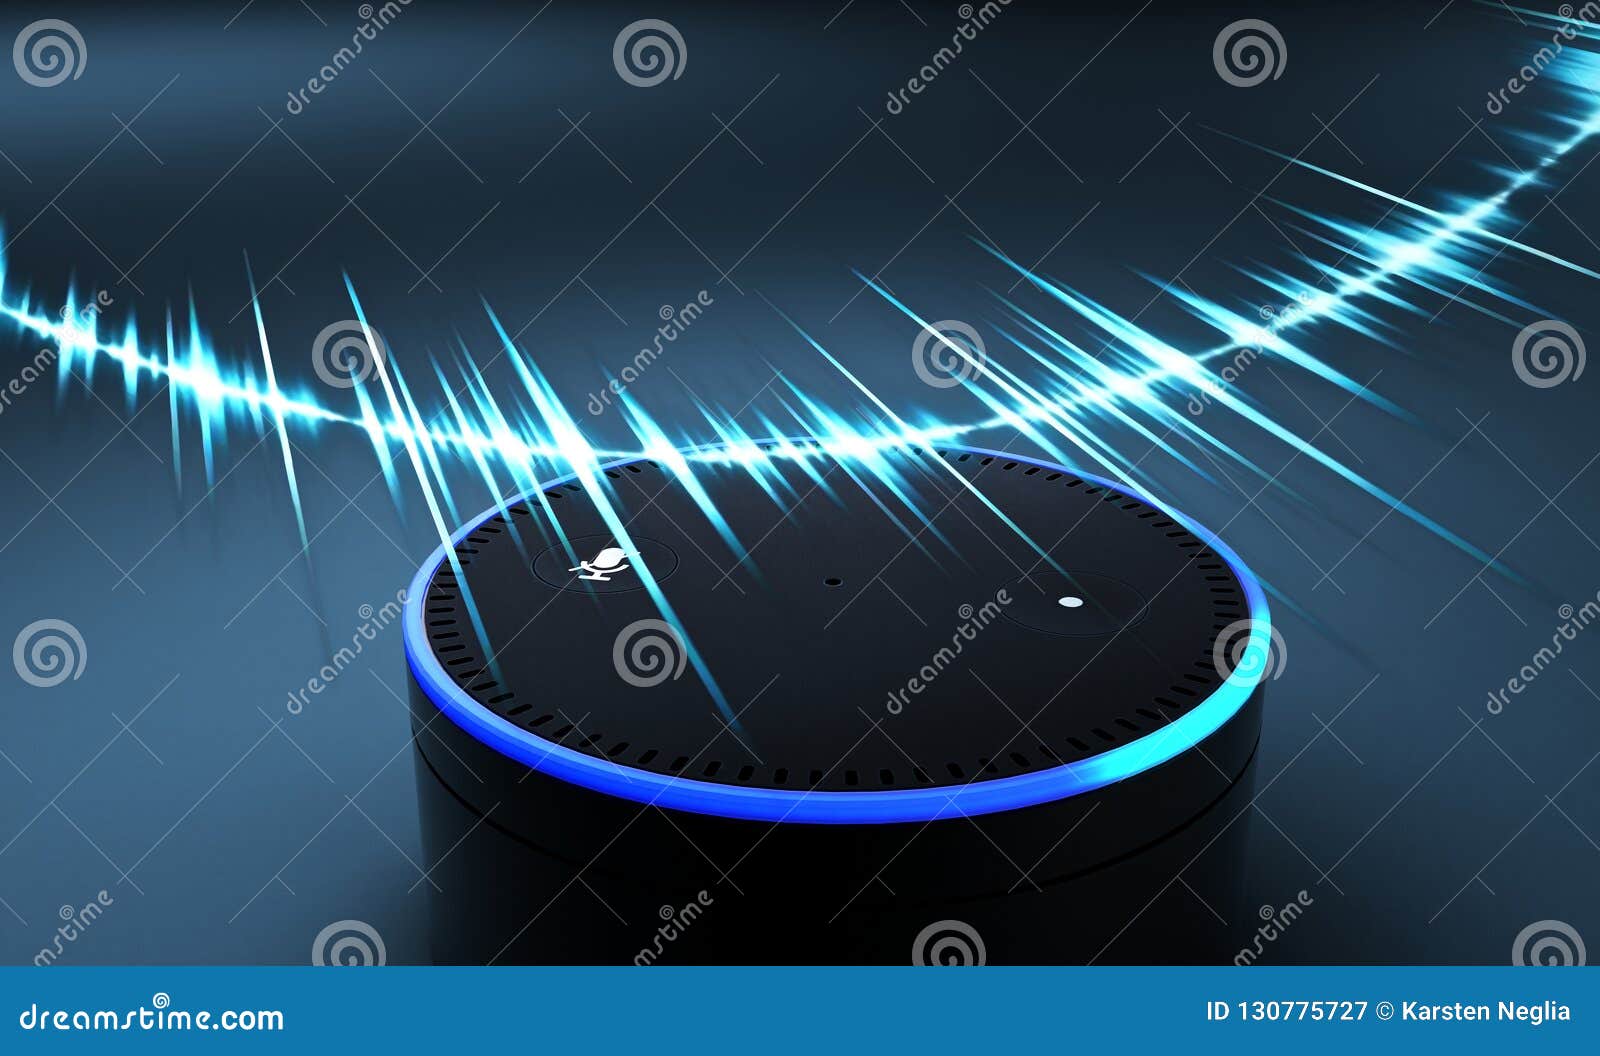 3d rendering of voice recognition system on blue ground